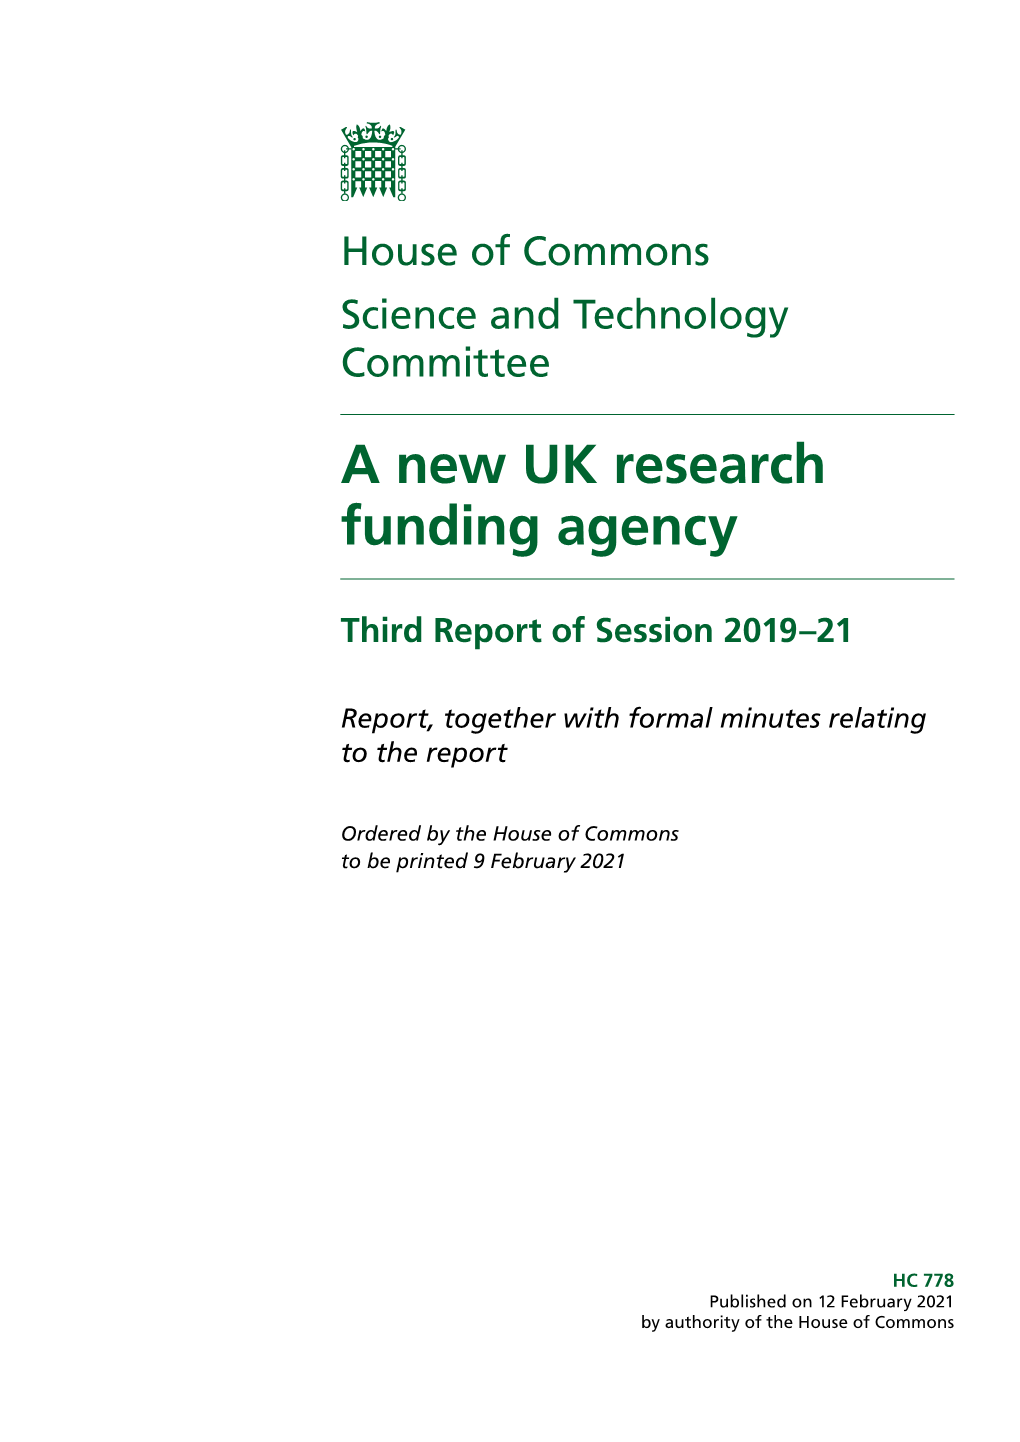 A New UK Research Funding Agency